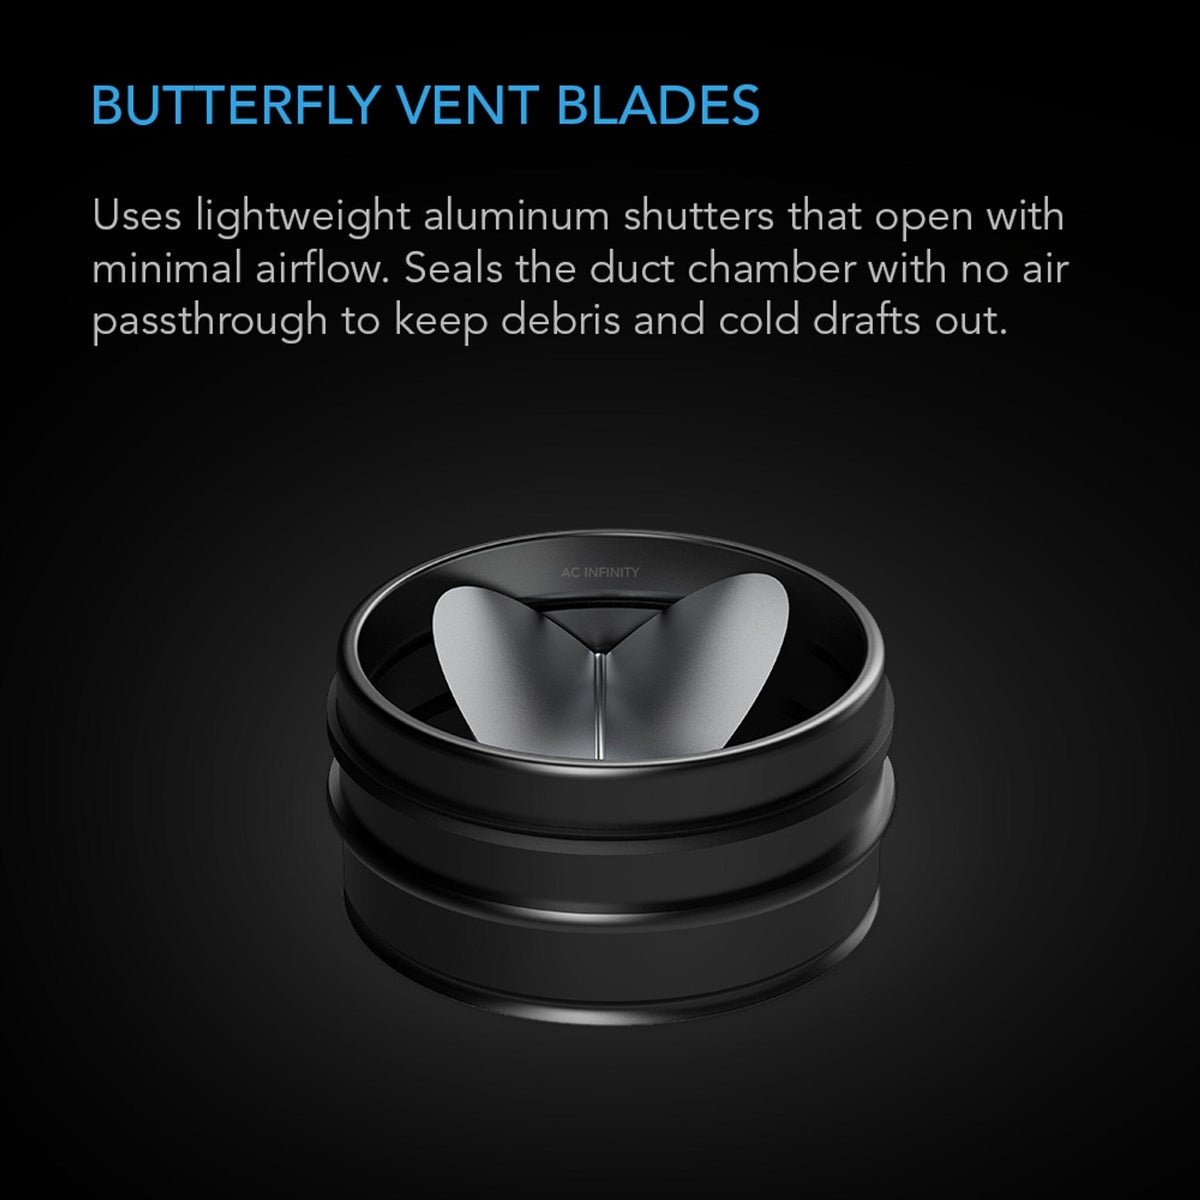 Butterfly vent blades